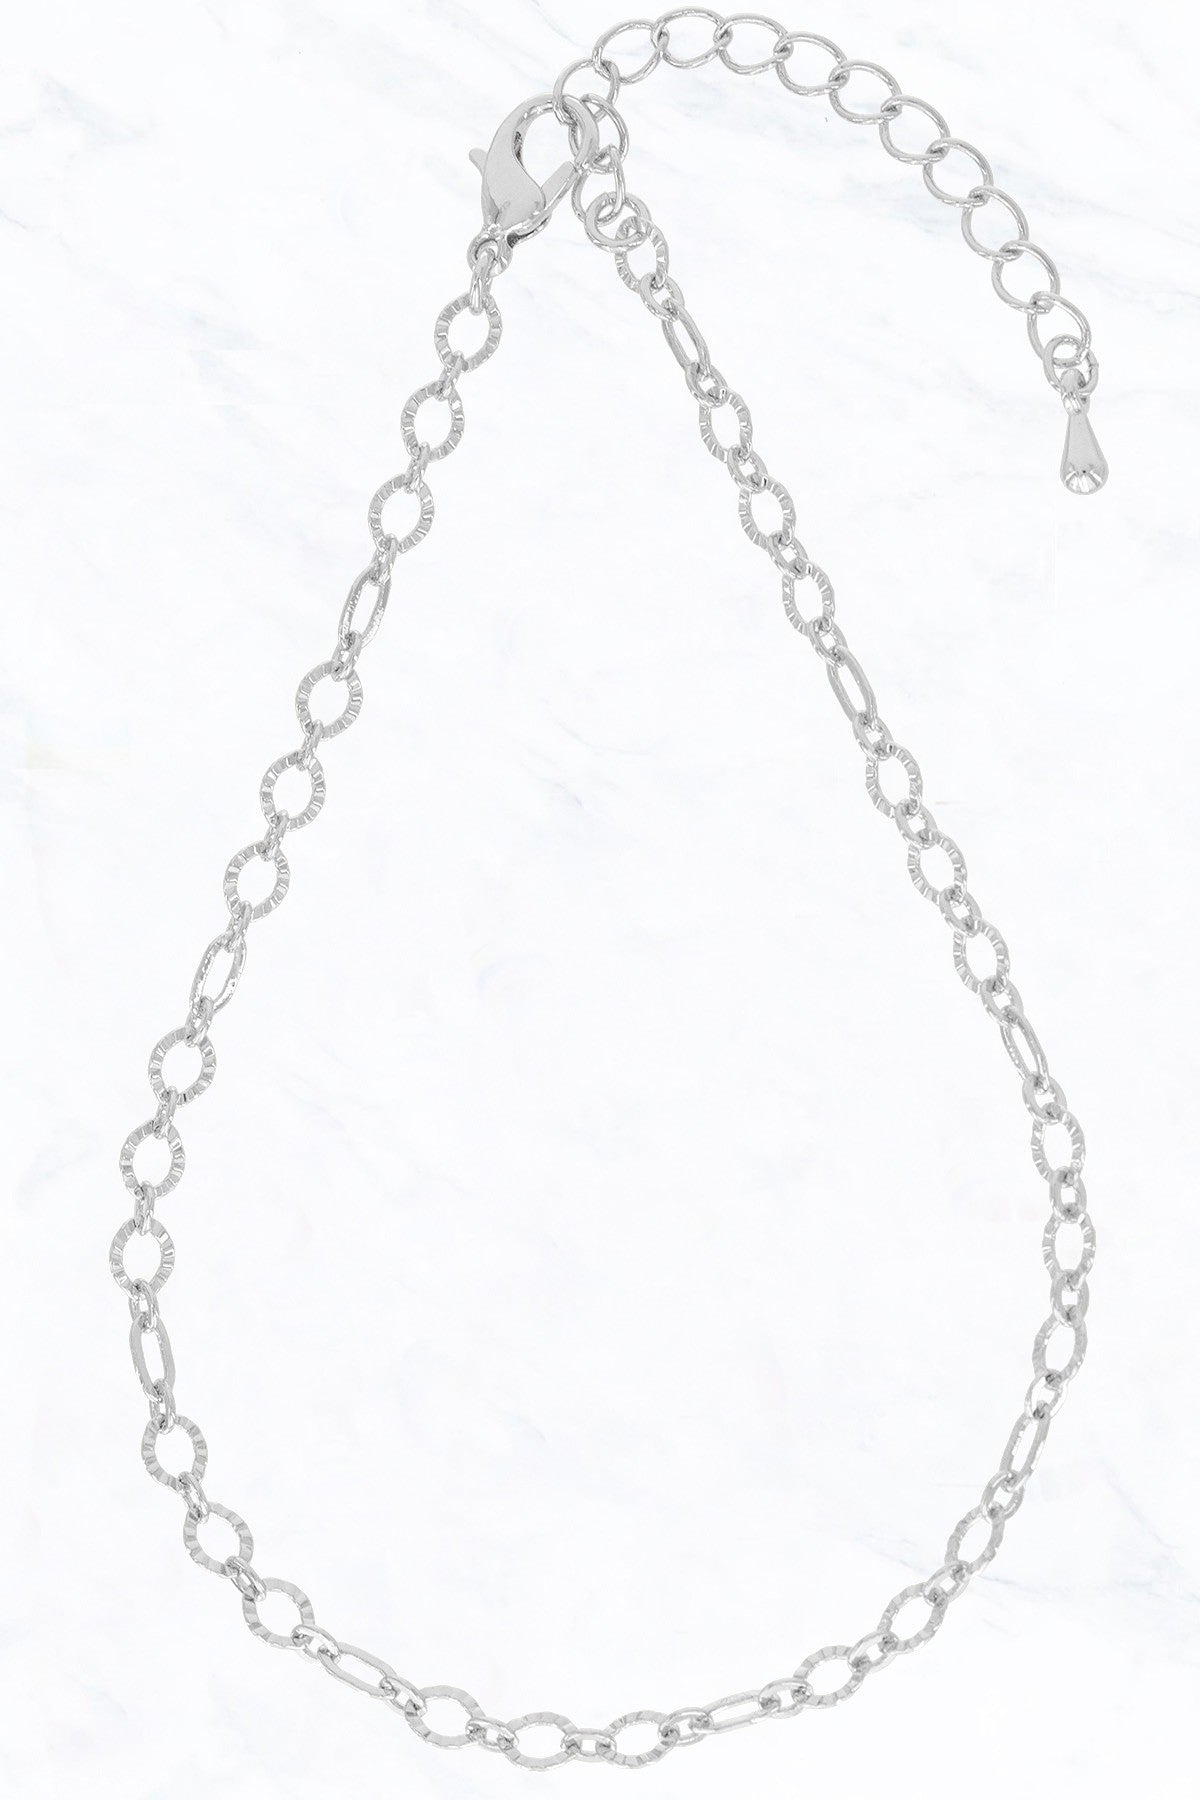 Textured Link Chain Anklet